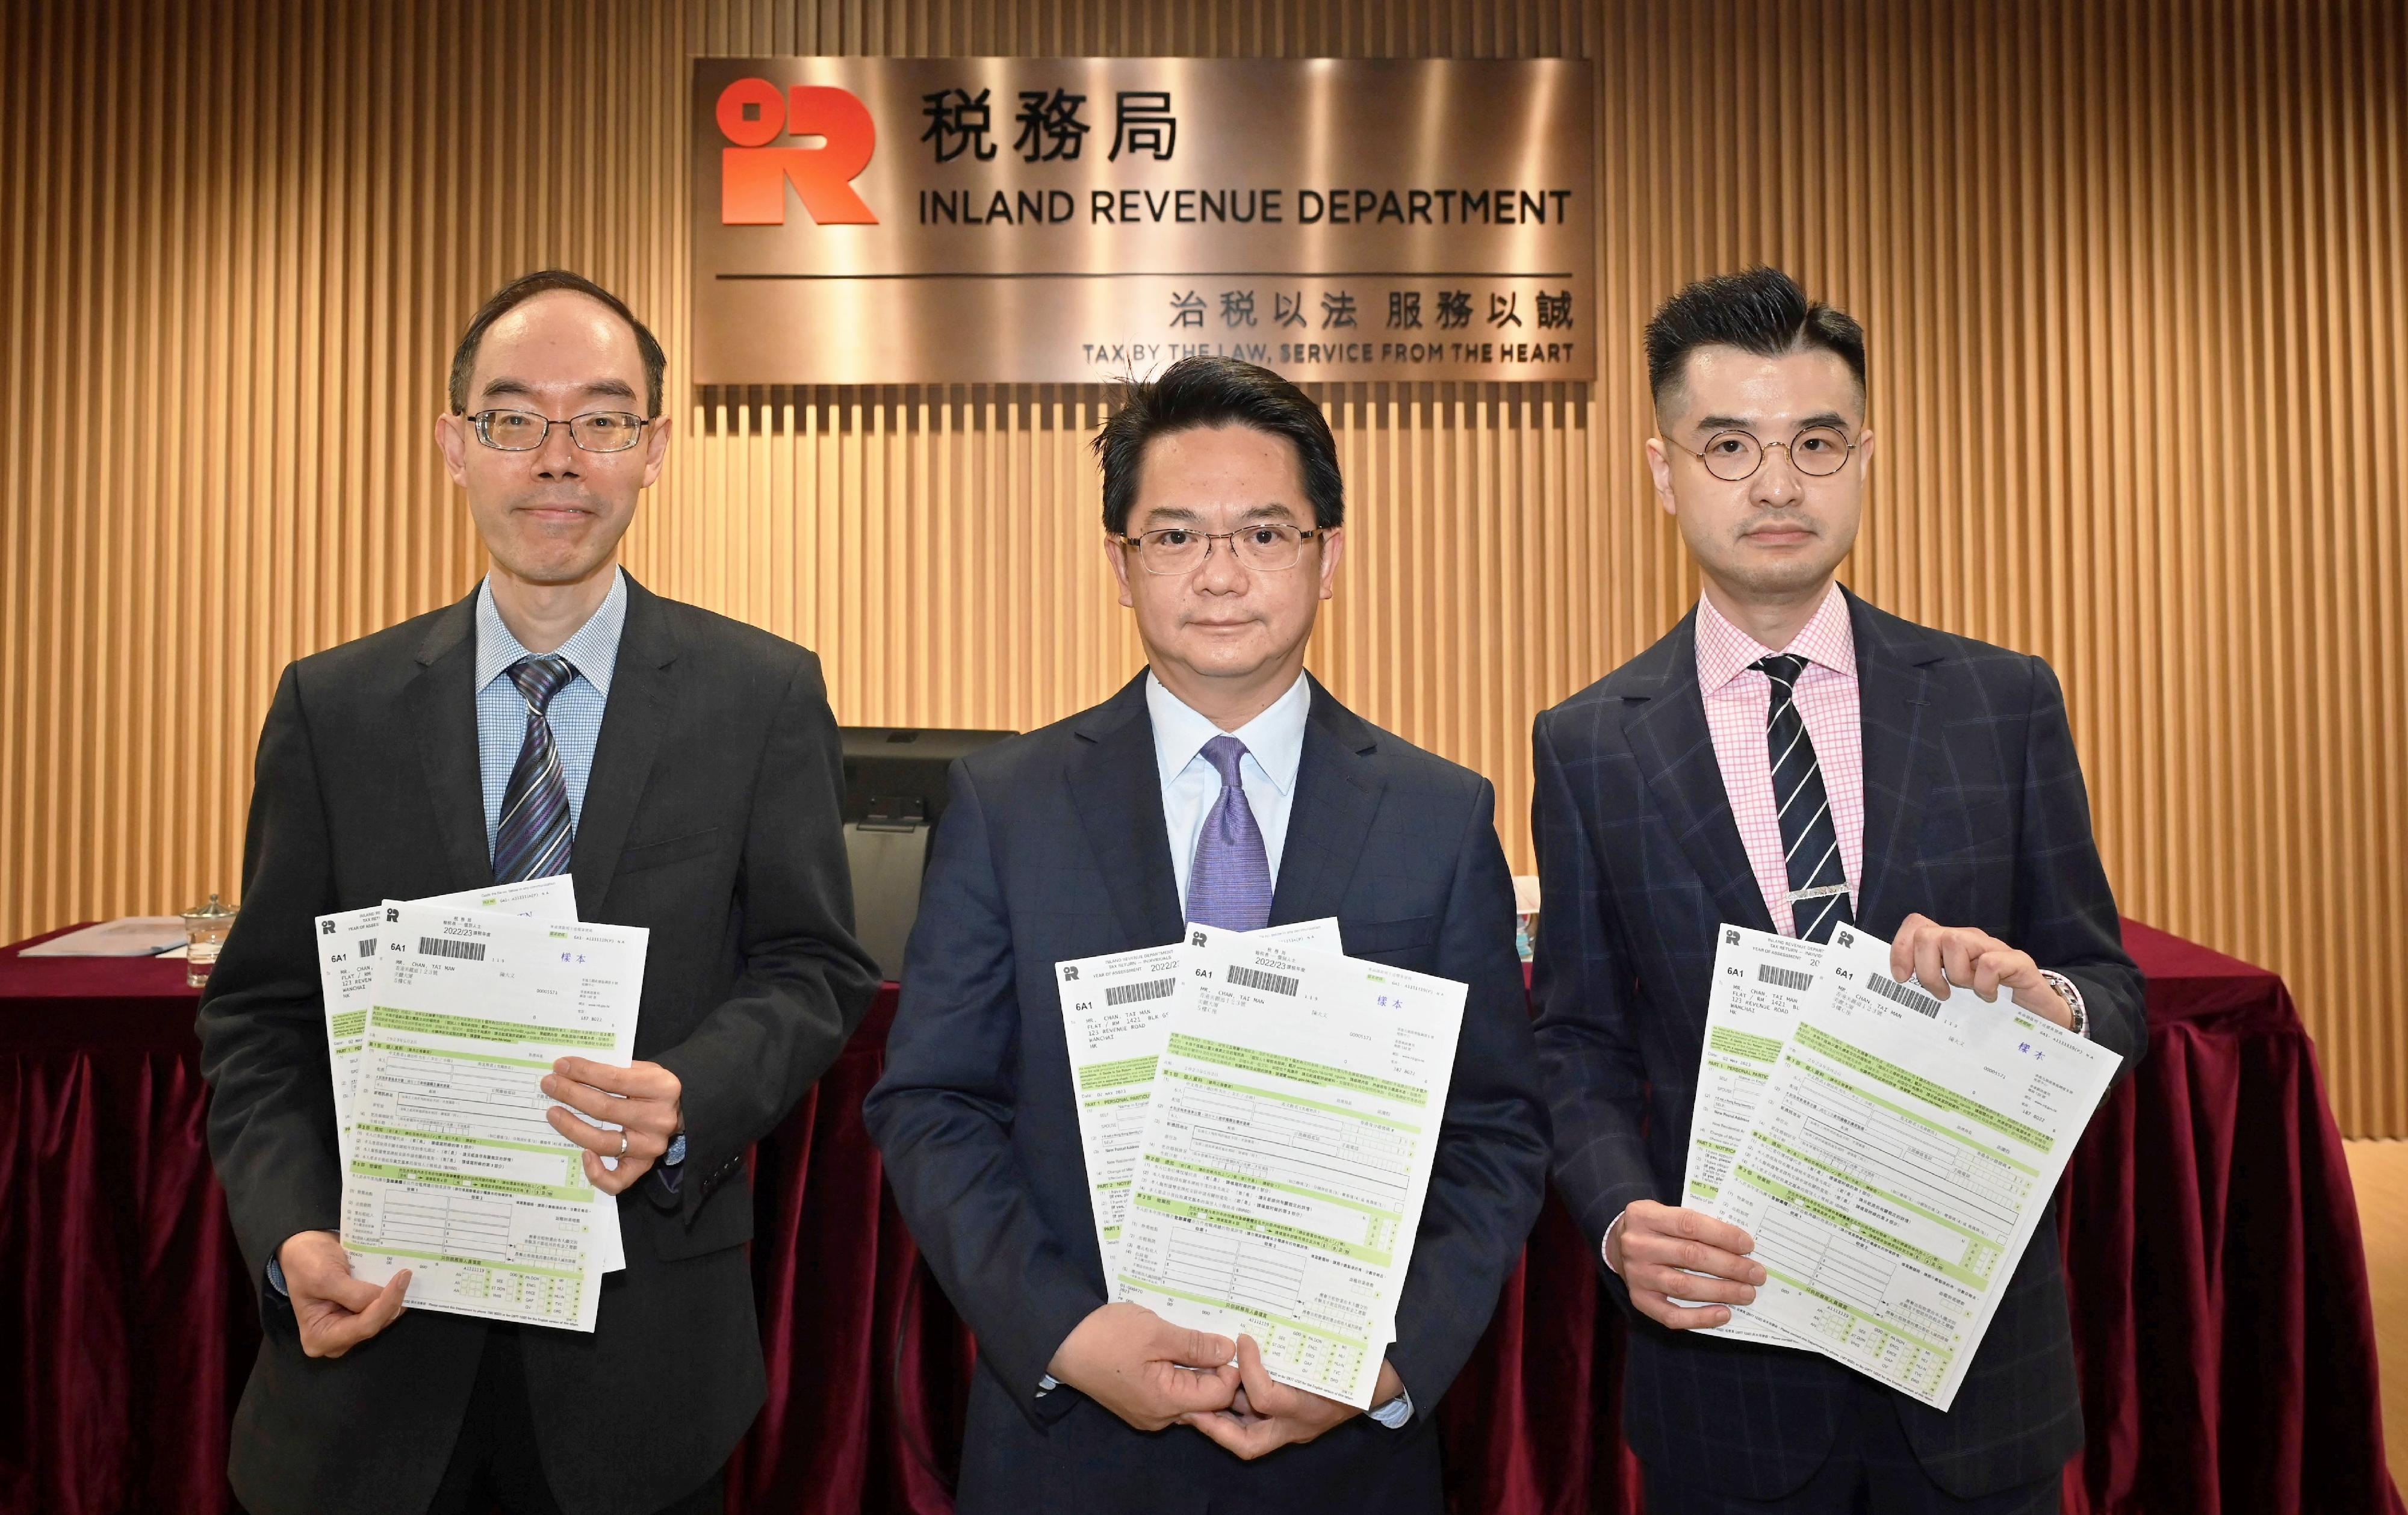 The Commissioner of Inland Revenue, Mr Tam Tai-pang (centre), today (May 2) hosted a press conference on the completion of tax returns for individuals for the year of assessment 2022/23 and the tax collection of 2022-23, and also introduced the new functions and services of eTAX. Also in attendance are the Deputy Commissioner of Inland Revenue (Operations), Mr Leung Kin-wa (left) and the Deputy Commissioner of Inland Revenue (Technical), Mr Benjamin Chan (right).